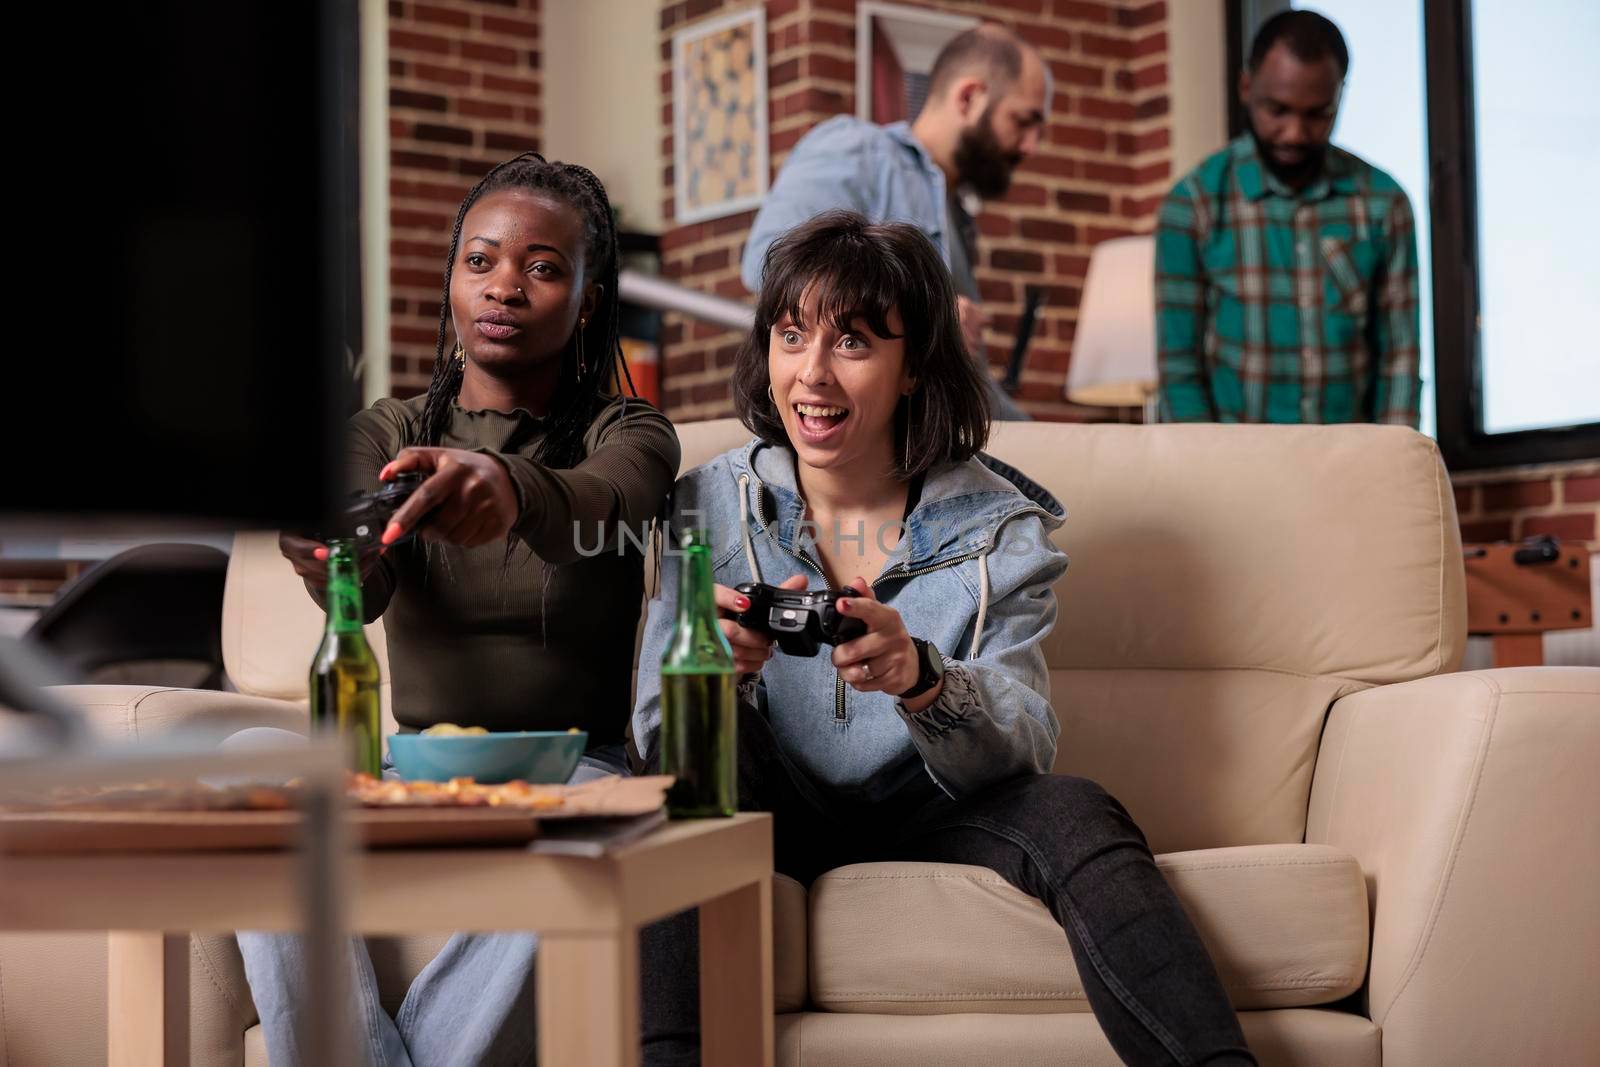 Multiethnic women playing video games with controller on console, having fun together at party gathering with friends. People enjoying leisure activity and competition, drinking beer.